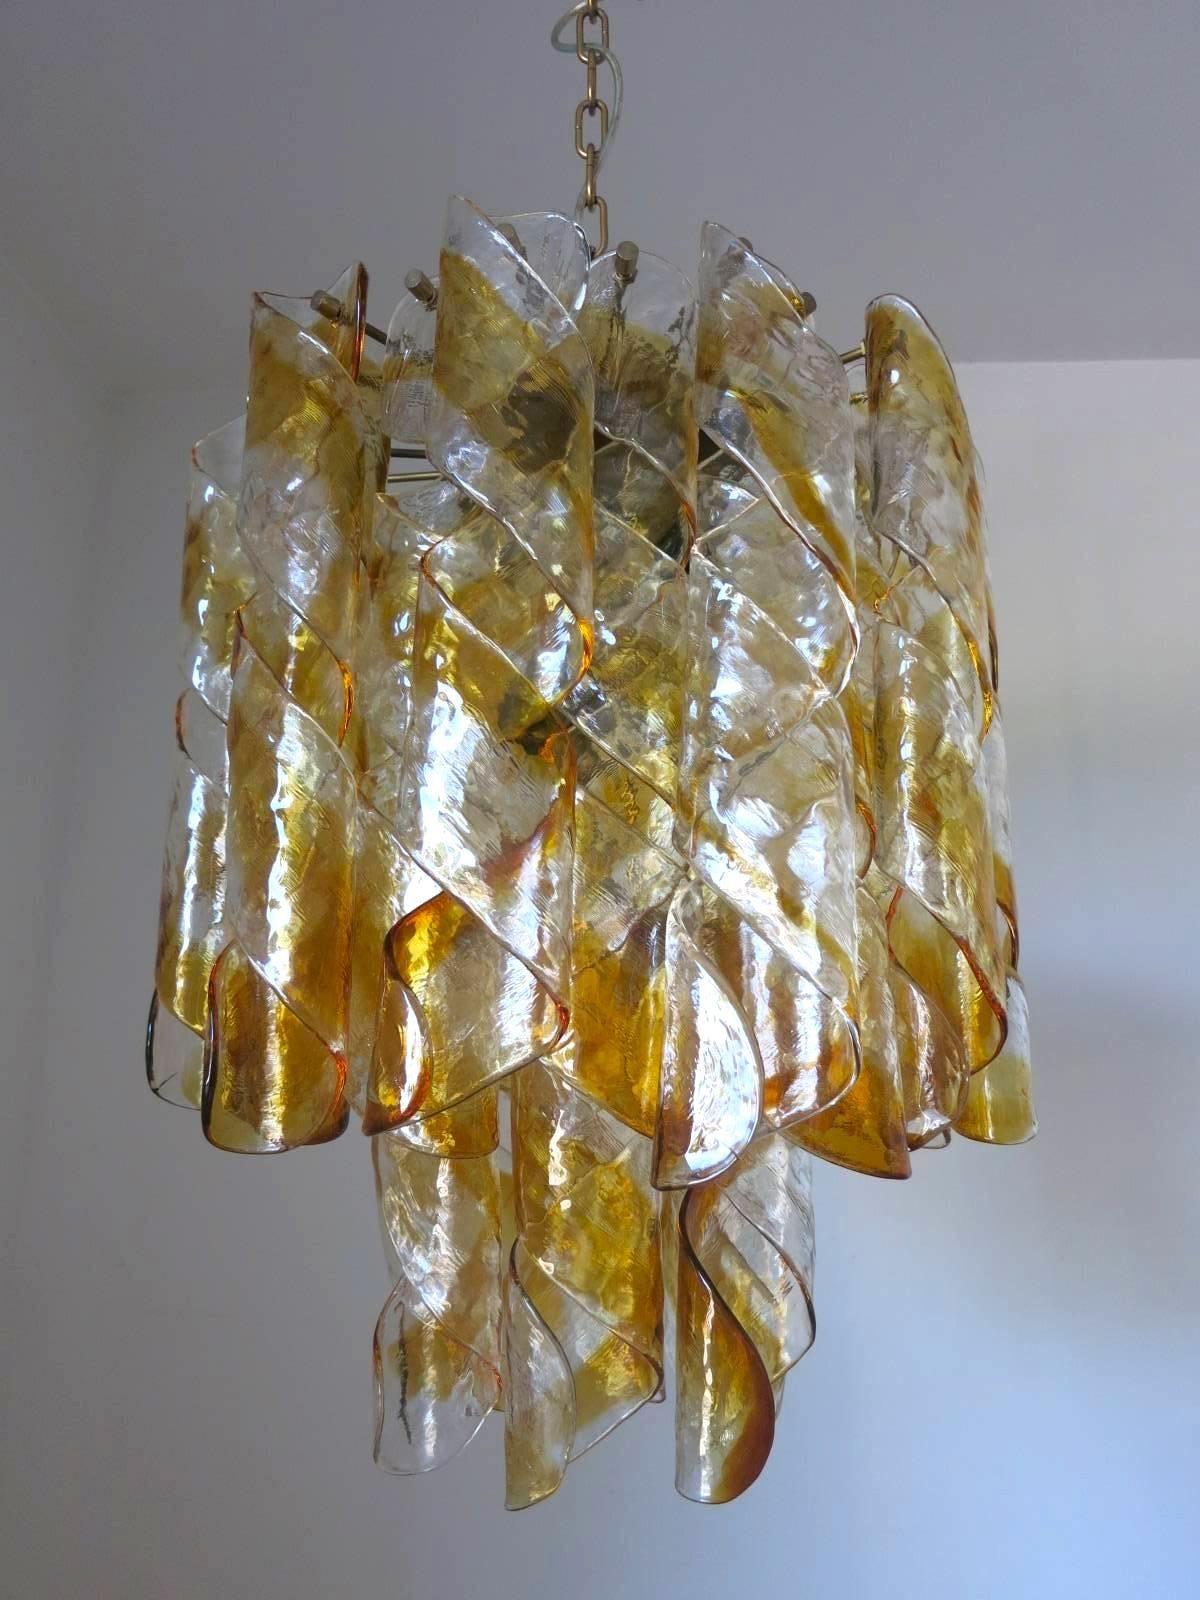 Vintage Italian chandelier with 32 clear and amber infused Murano glasses blown into twisted spiral shapes, mounted on brass metal frame / Designed by Mazzega circa 1960’s / Made in Italy 7 lights /
Dimensions: diameter: 18 inches / height: 24